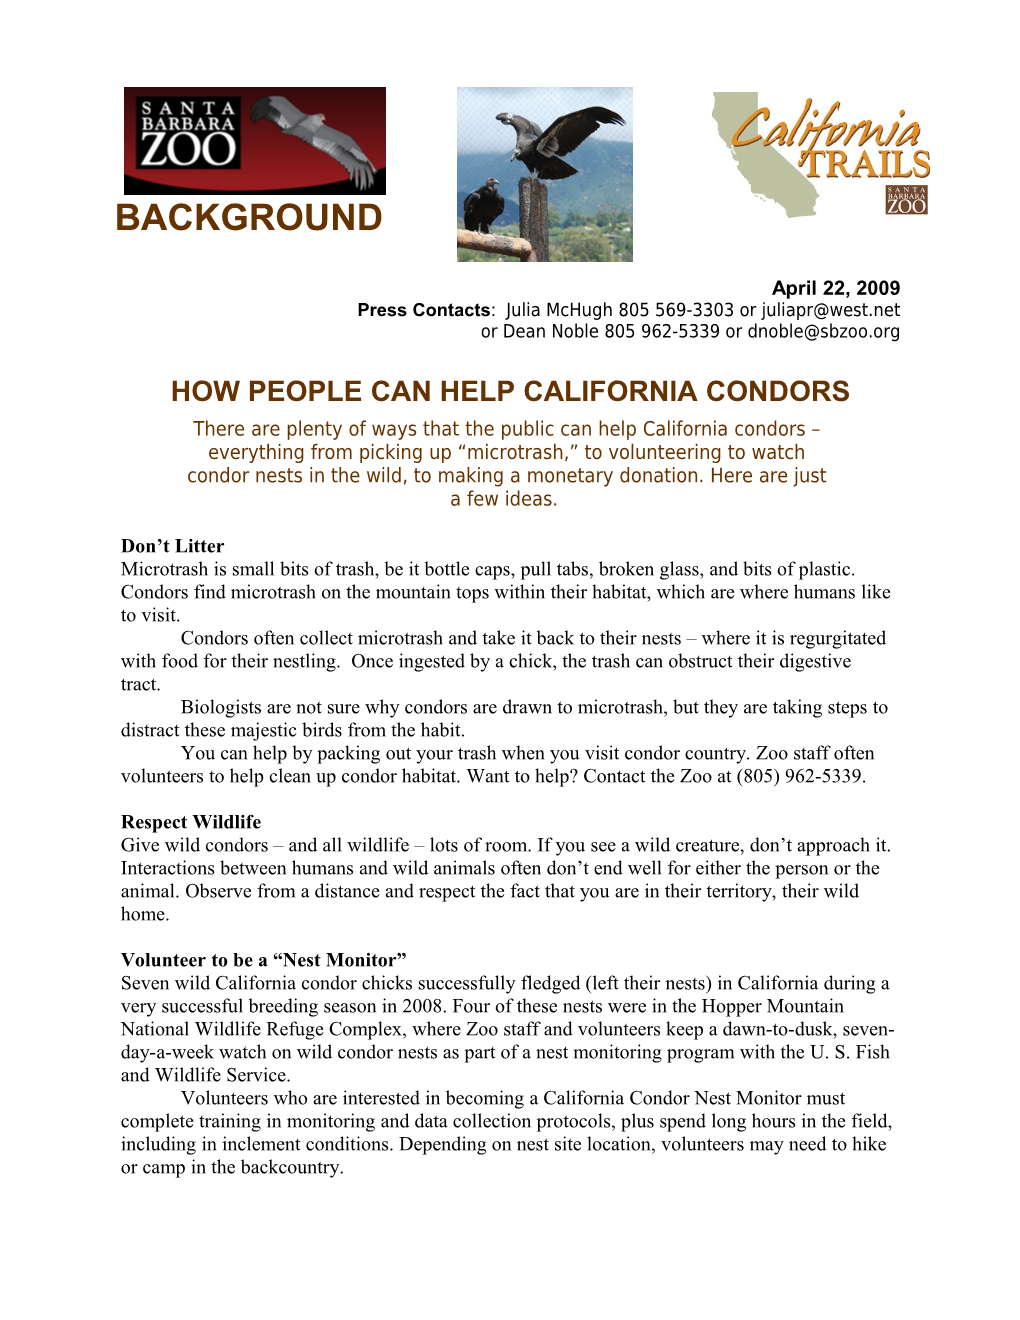 How People Can Help Californiacondors